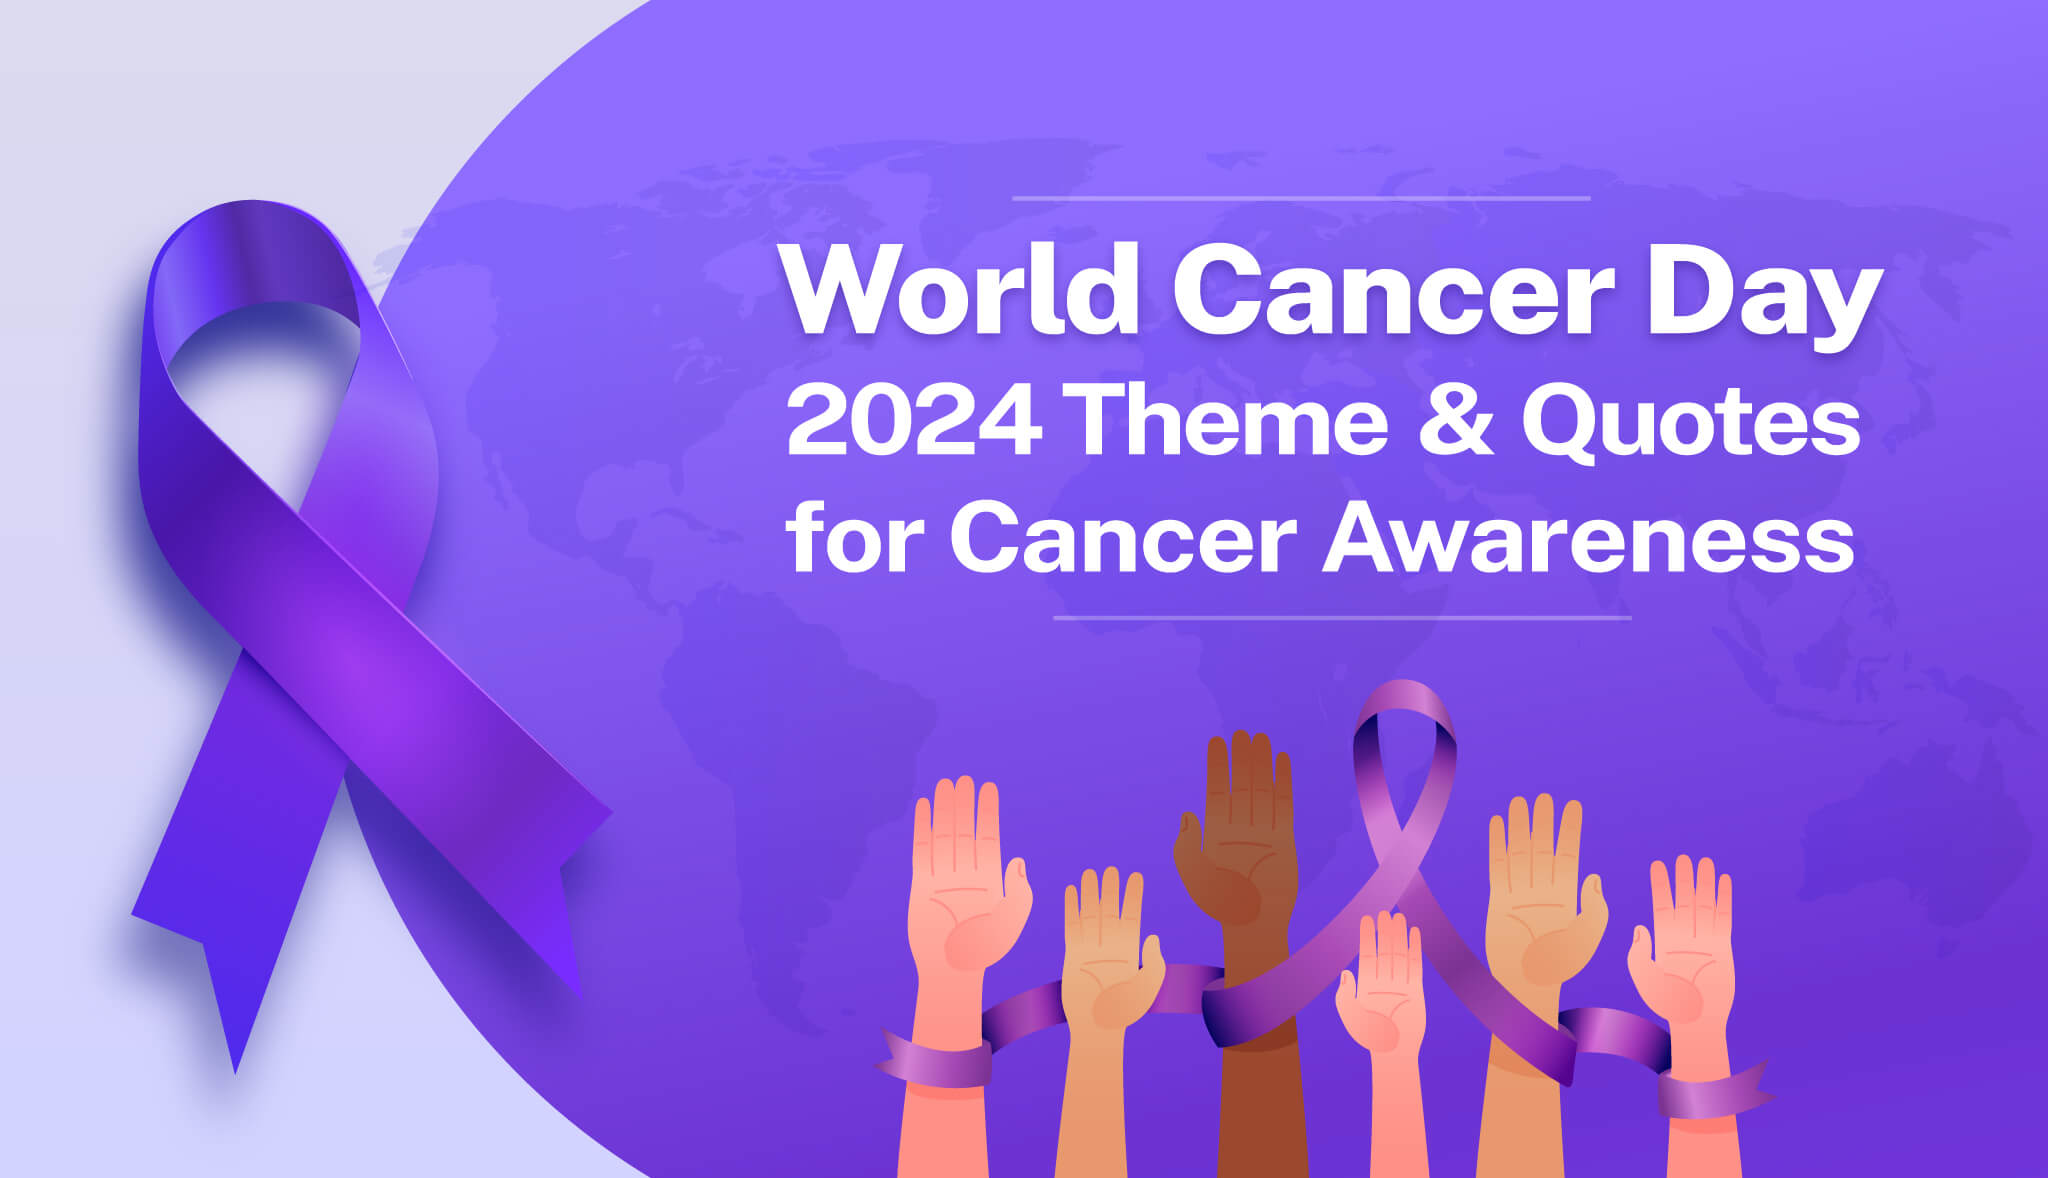 World Cancer Day 2024 Theme & Quotes for Cancer Awareness